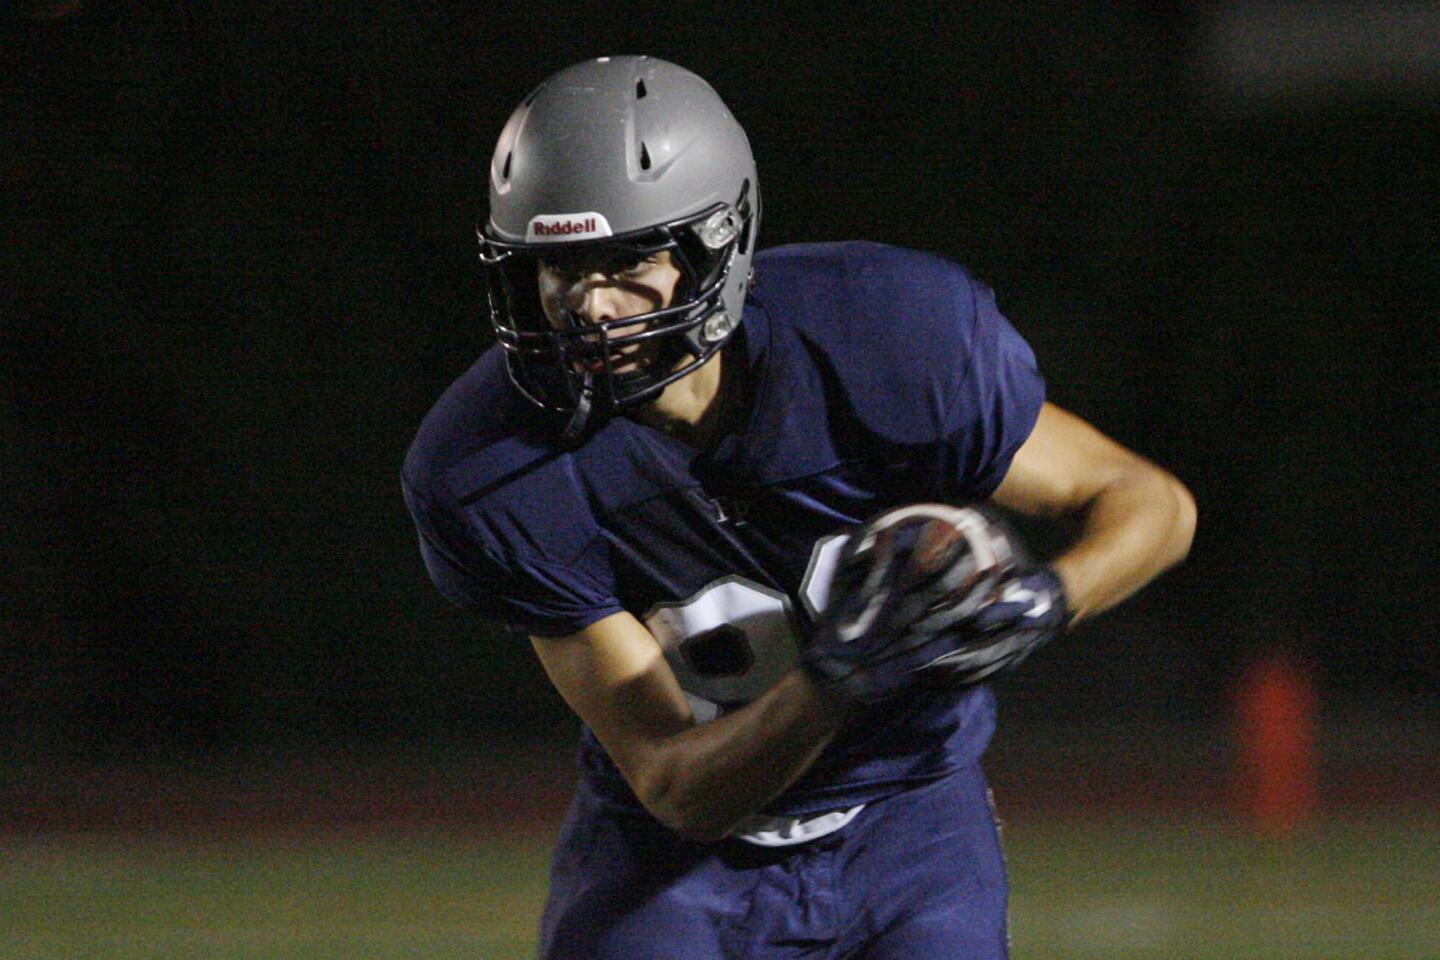 Flintridge Prep's Kareem Ismail runs with the ball during a game against Malibu at Occidental College in Los Angeles on Friday, September 21, 2012.